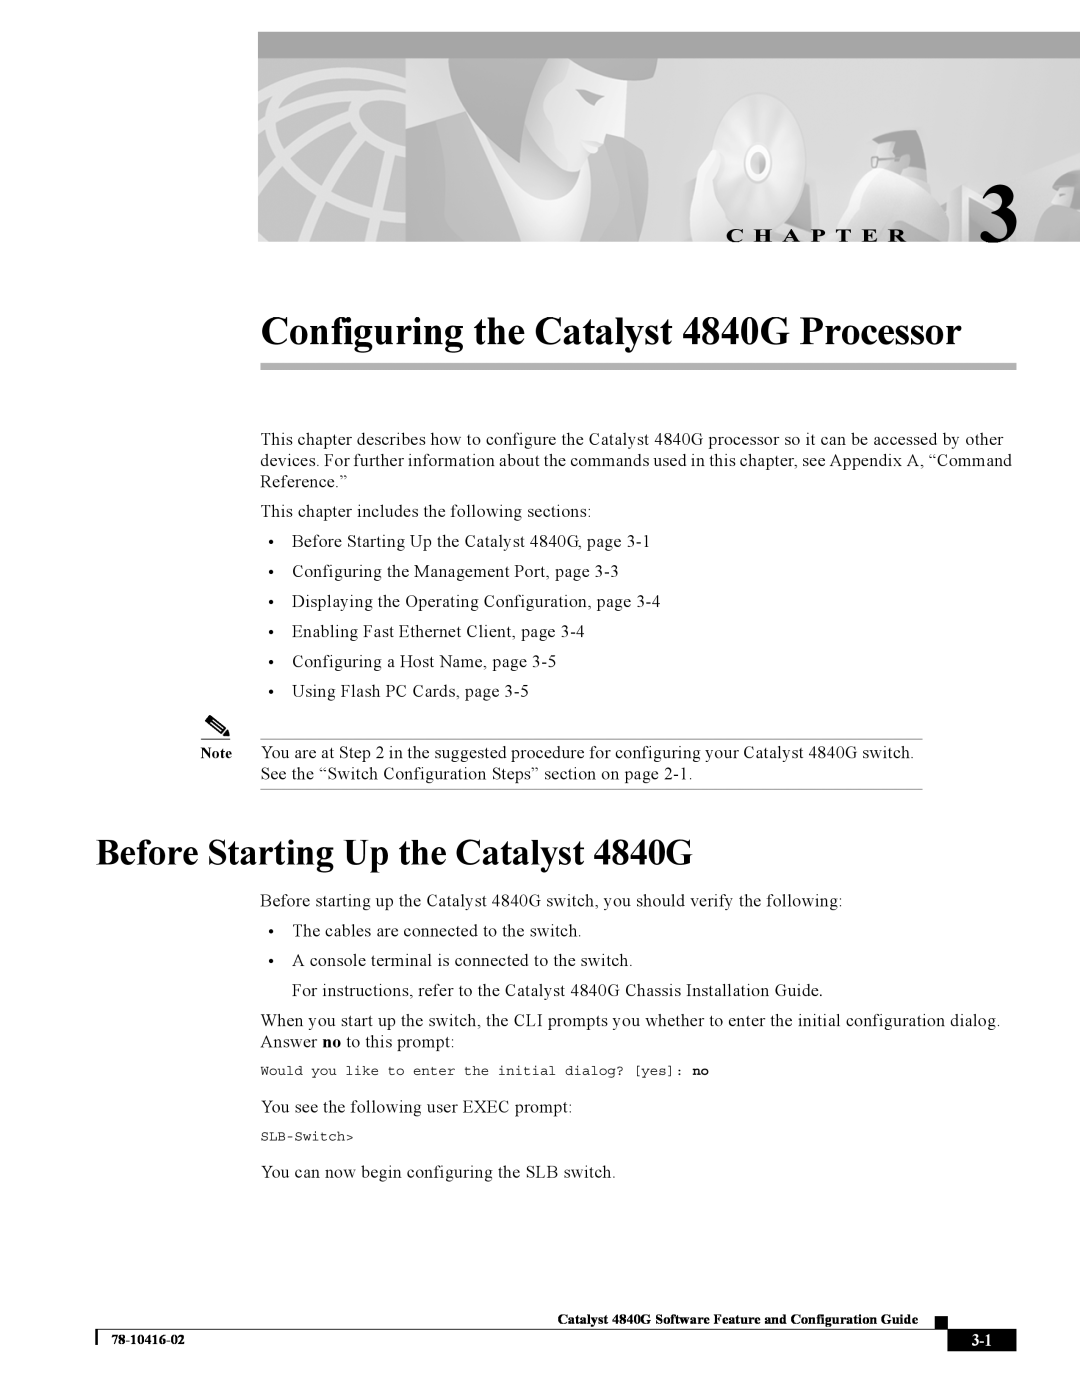 Cisco Systems appendix Before Starting Up the Catalyst 4840G, Configuring the Catalyst 4840G Processor, C H A P T E R 